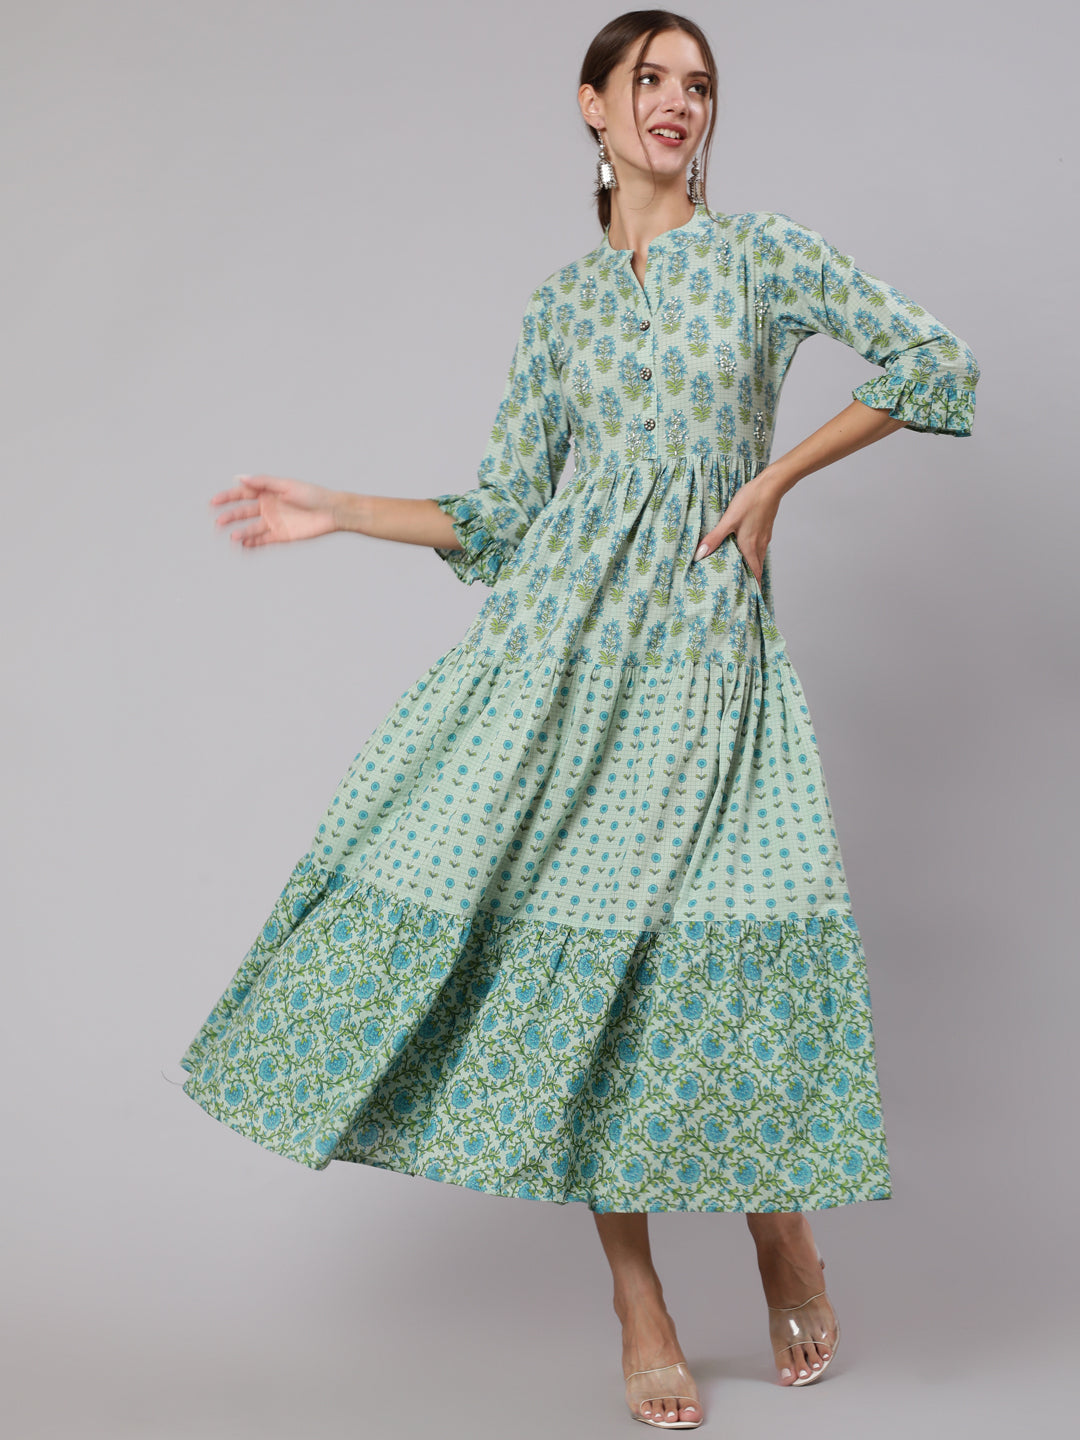 Green Color Cotton Embellished Floral Block Printed Dress With Three-Fourth Sleeves